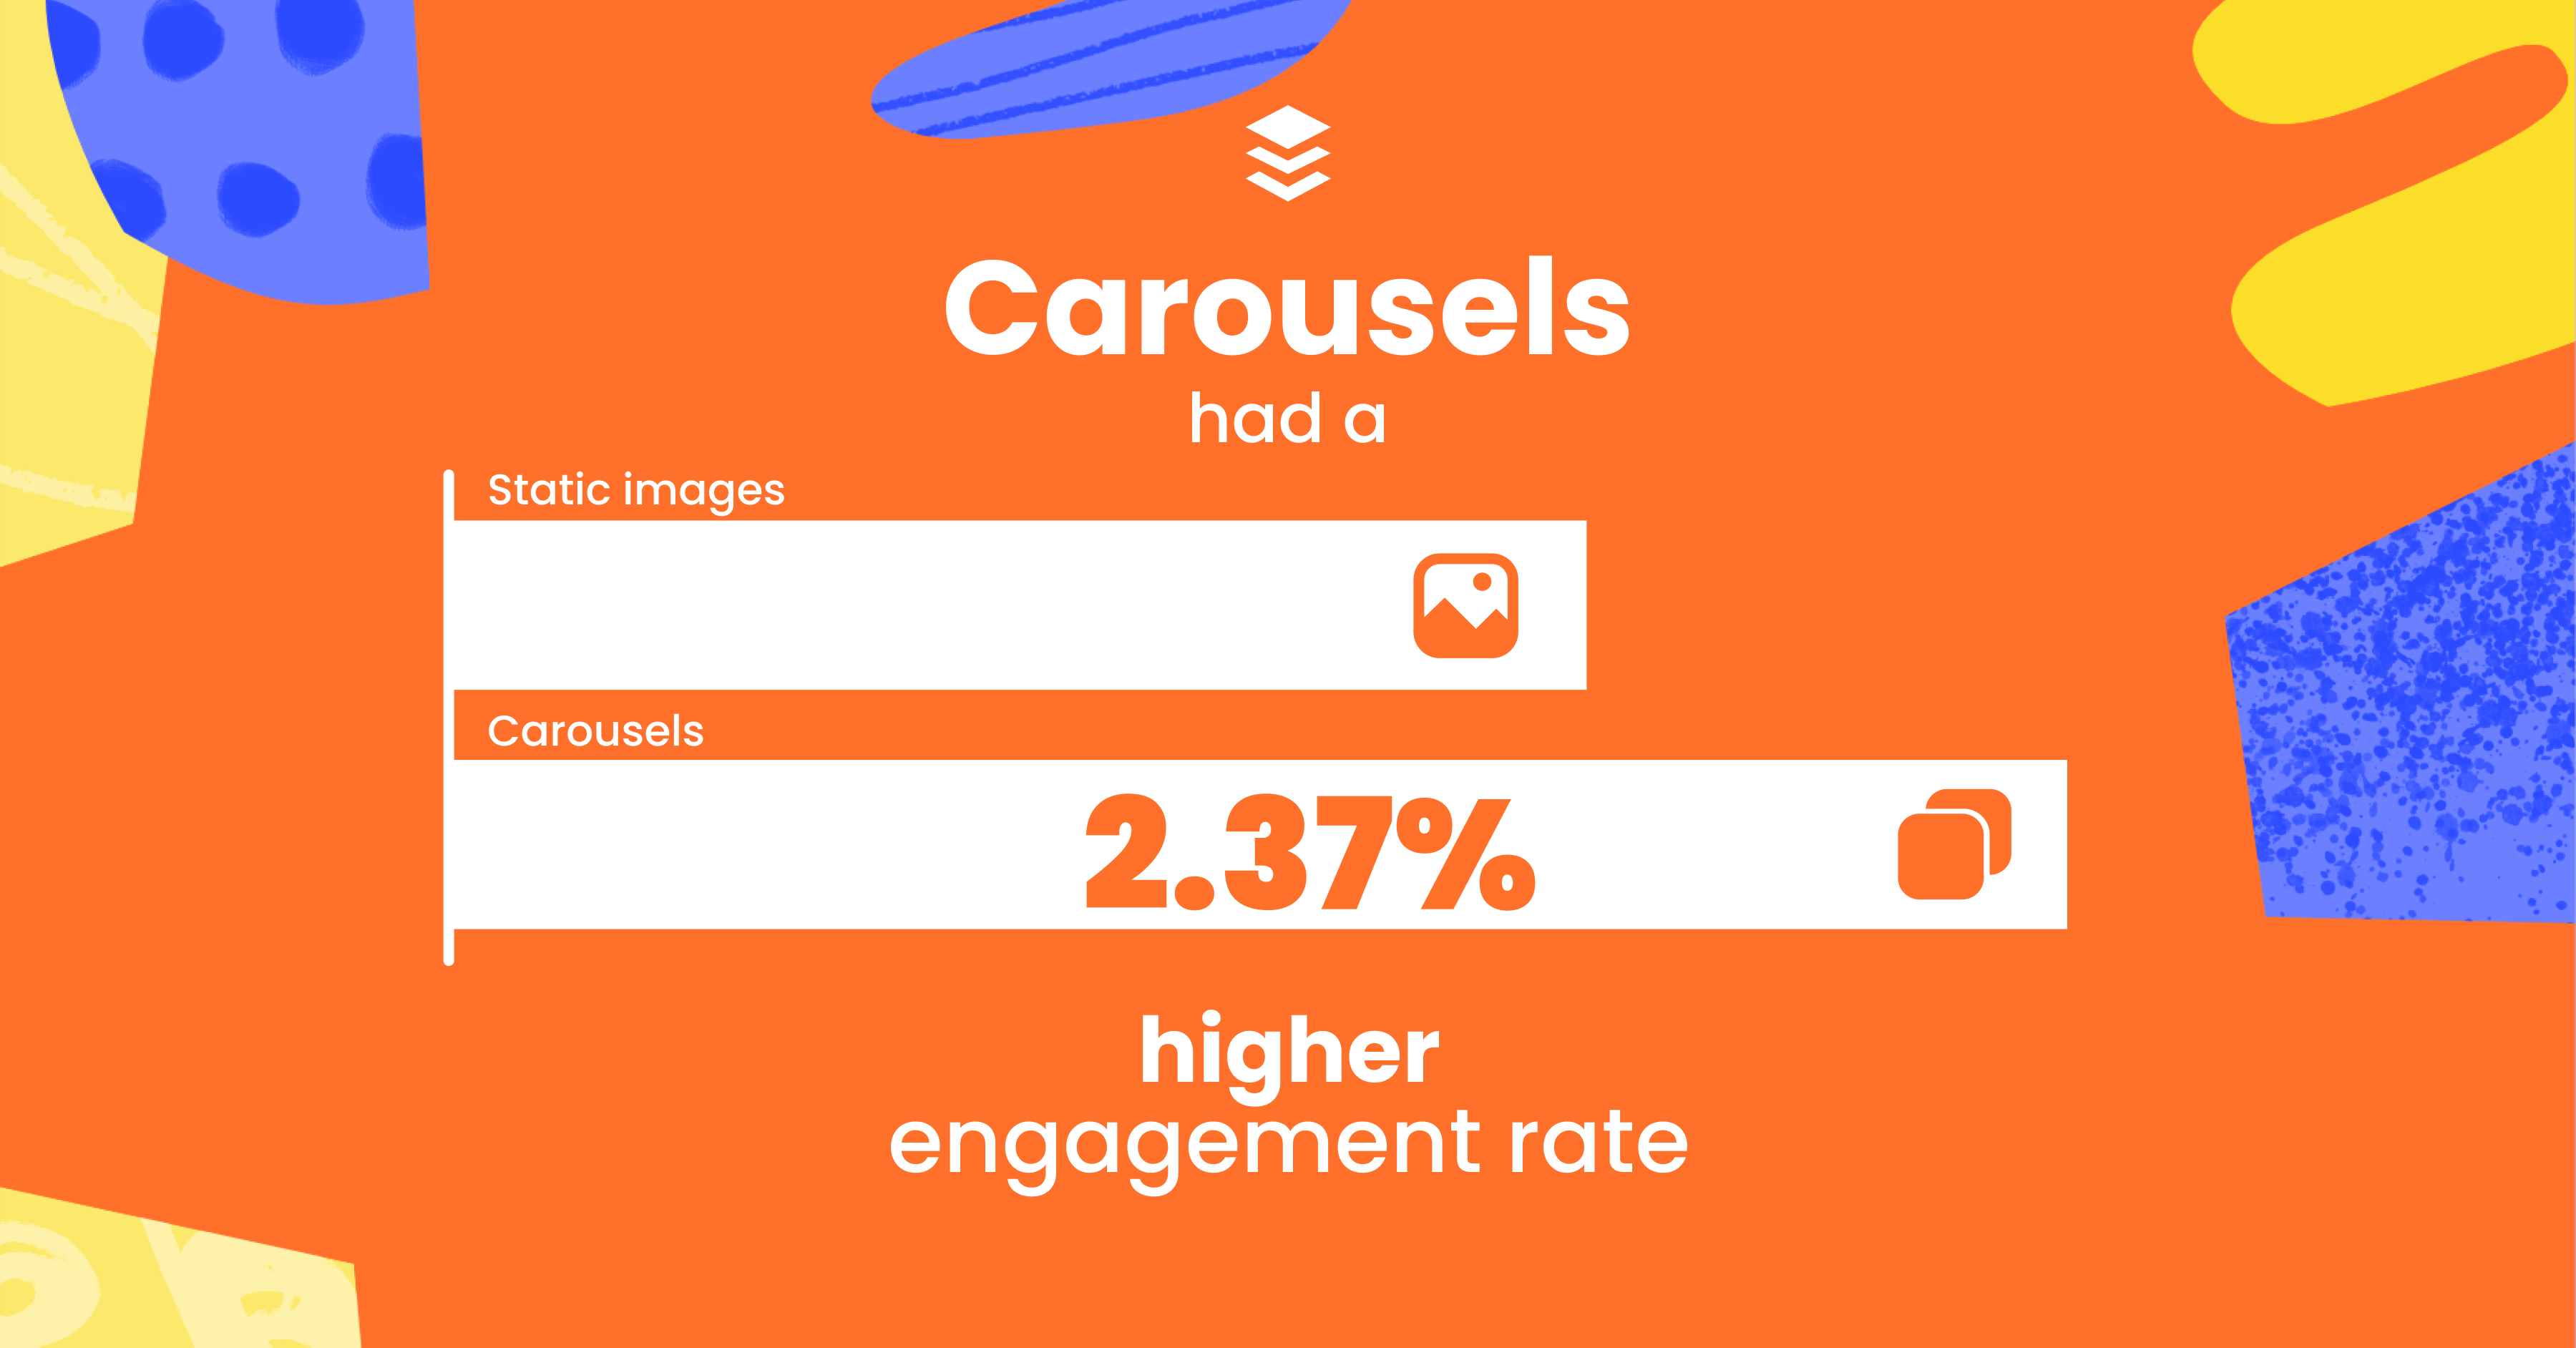 Instagram carousels have a 2.37% higher turnout